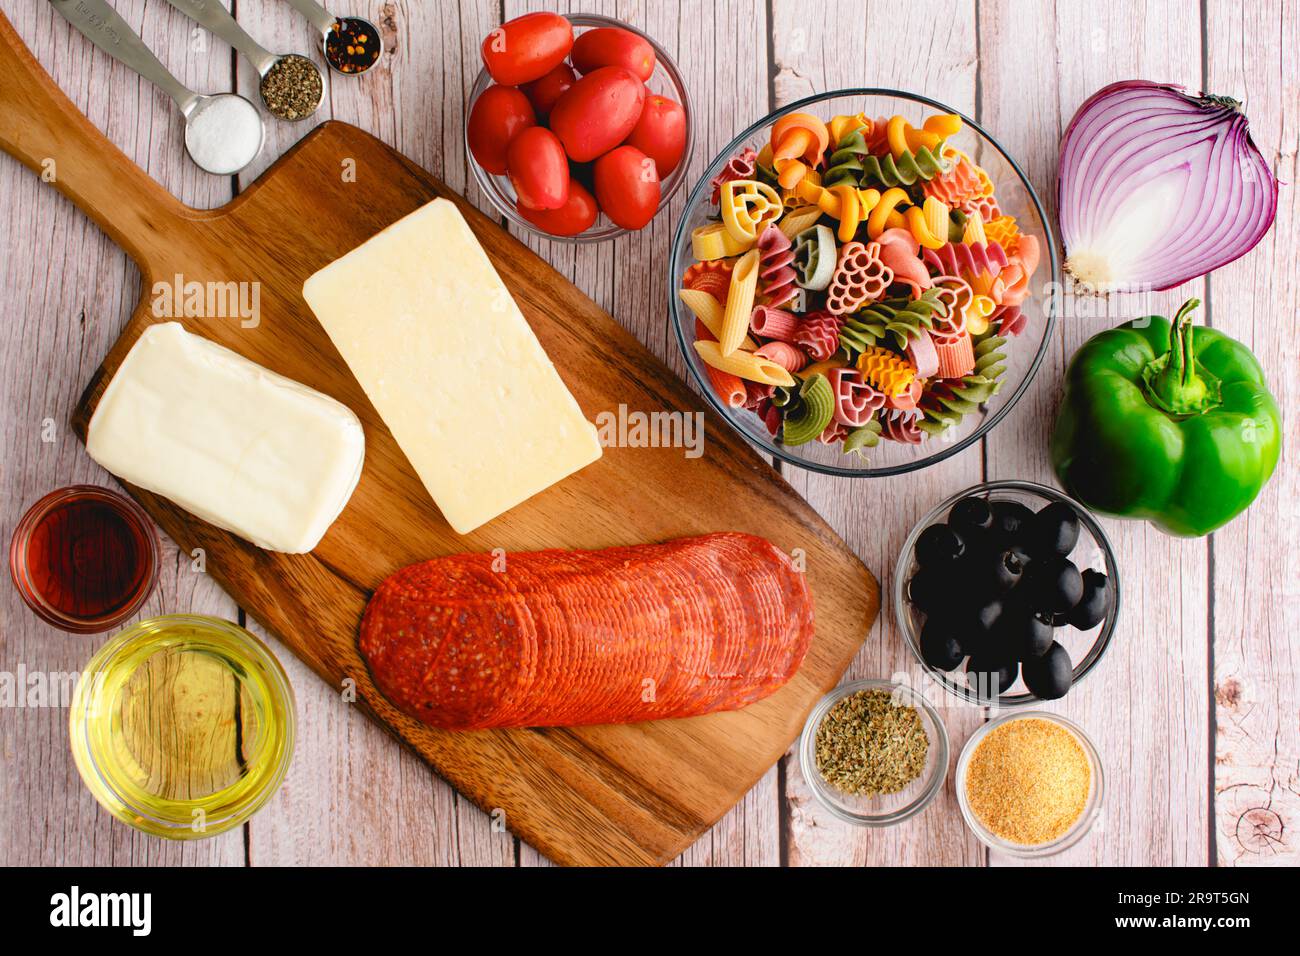 Classic Pasta Salad Ingredients on a Light Wooden Background: Uncooked pasta, olive oil, cheeses, and more on a rustic background Stock Photo